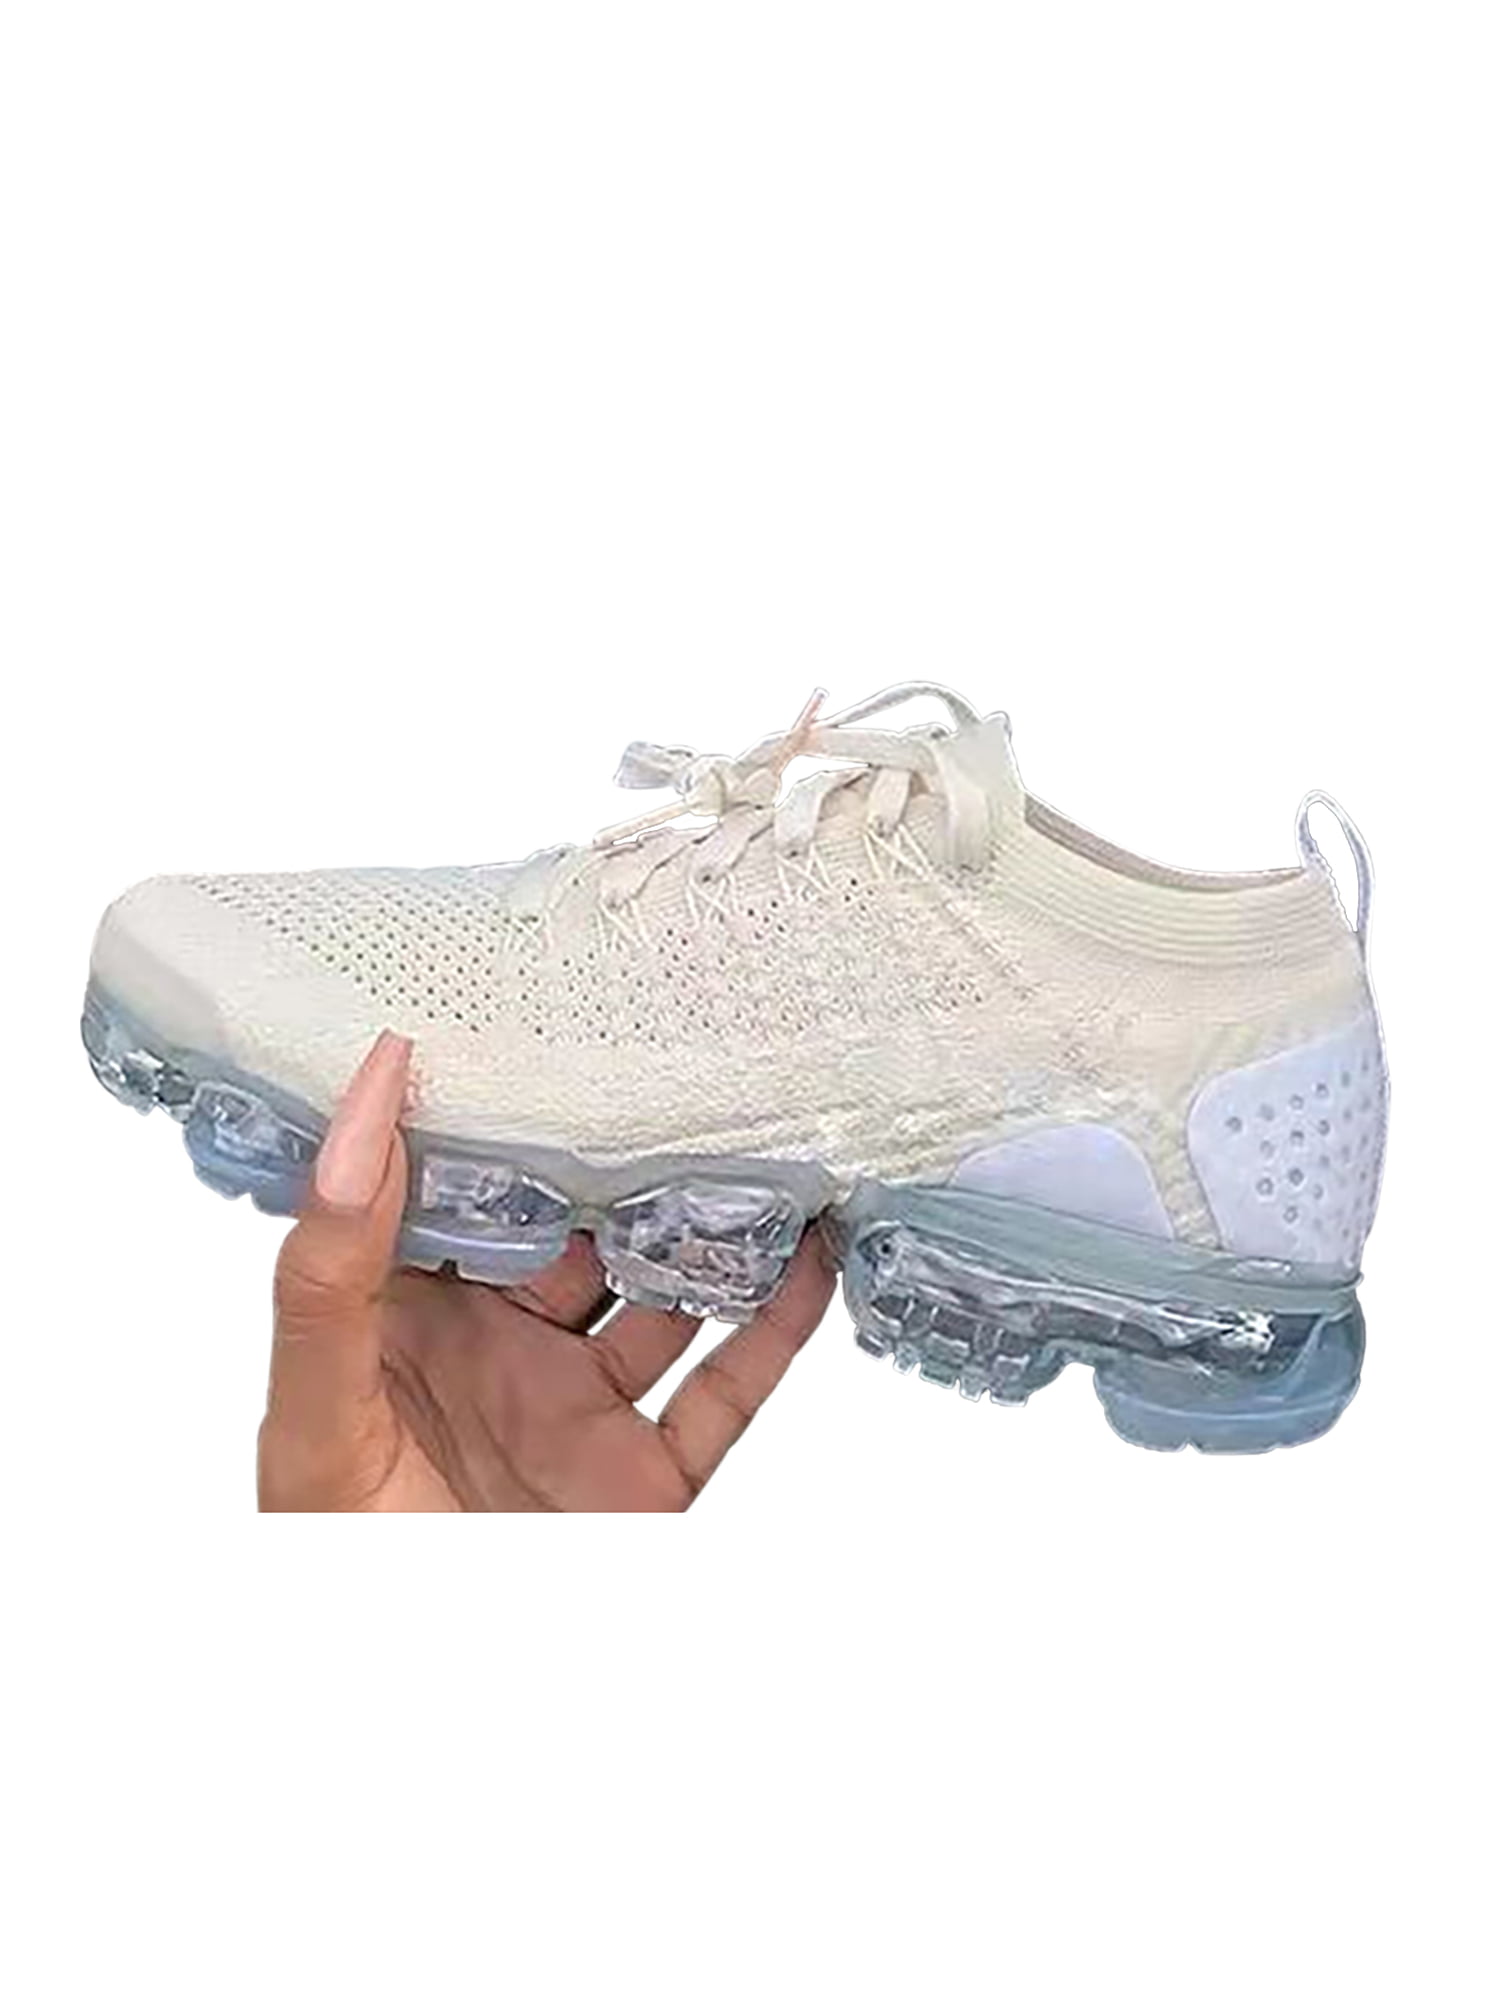 Womens Sneakers Athletic Tennis Shoes Casual Training Outdoor Running Sport Shoe 